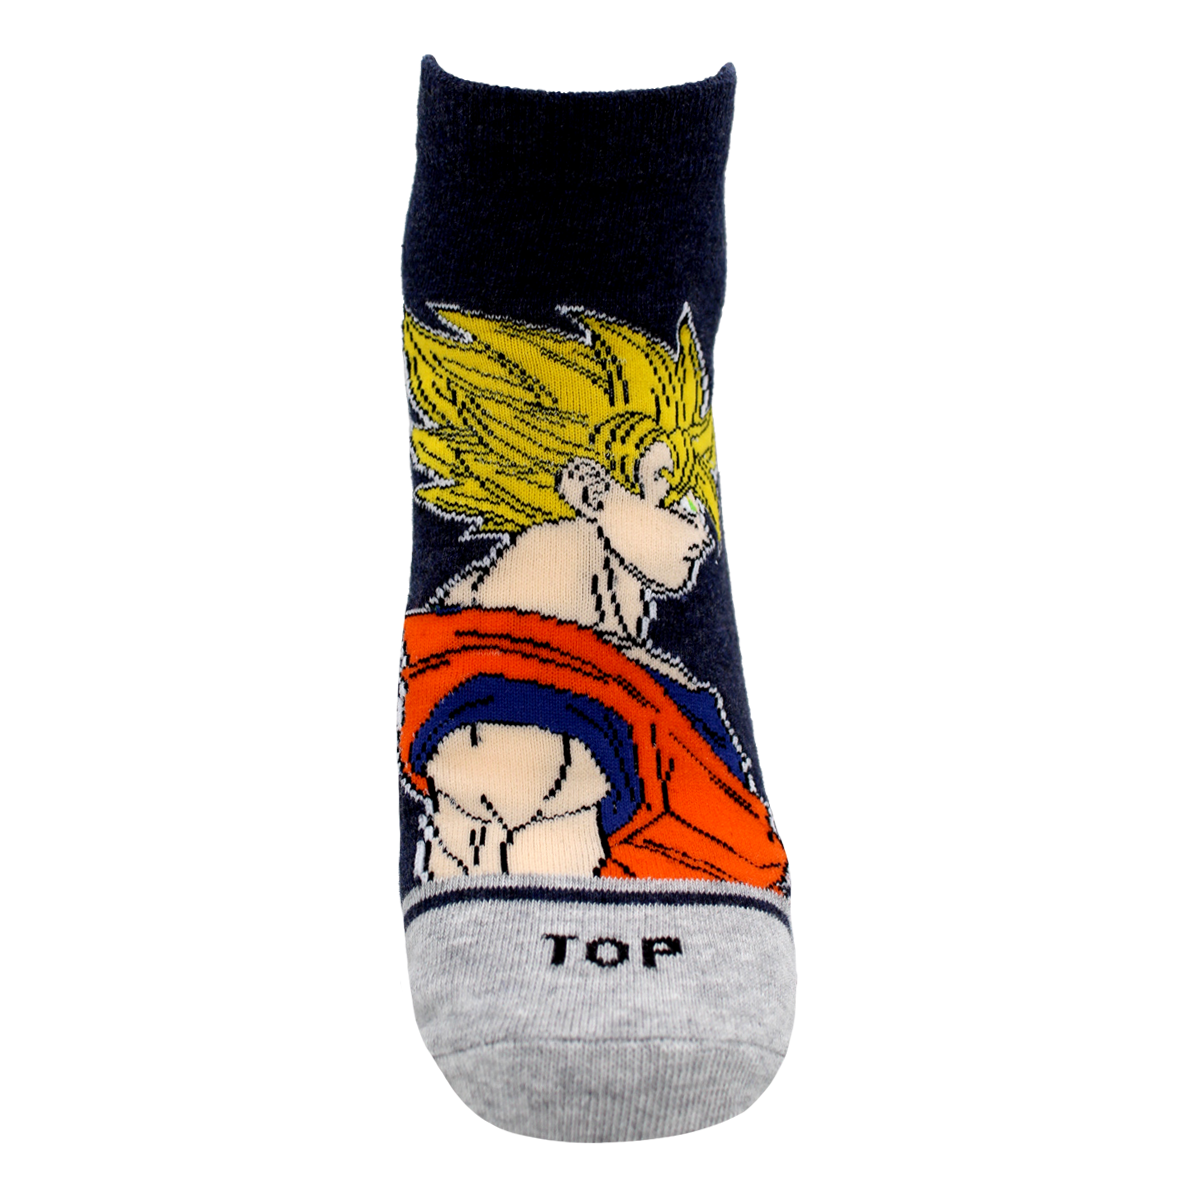 Calcetines Tobilleros Dragon Ball Z Pack 4 C2